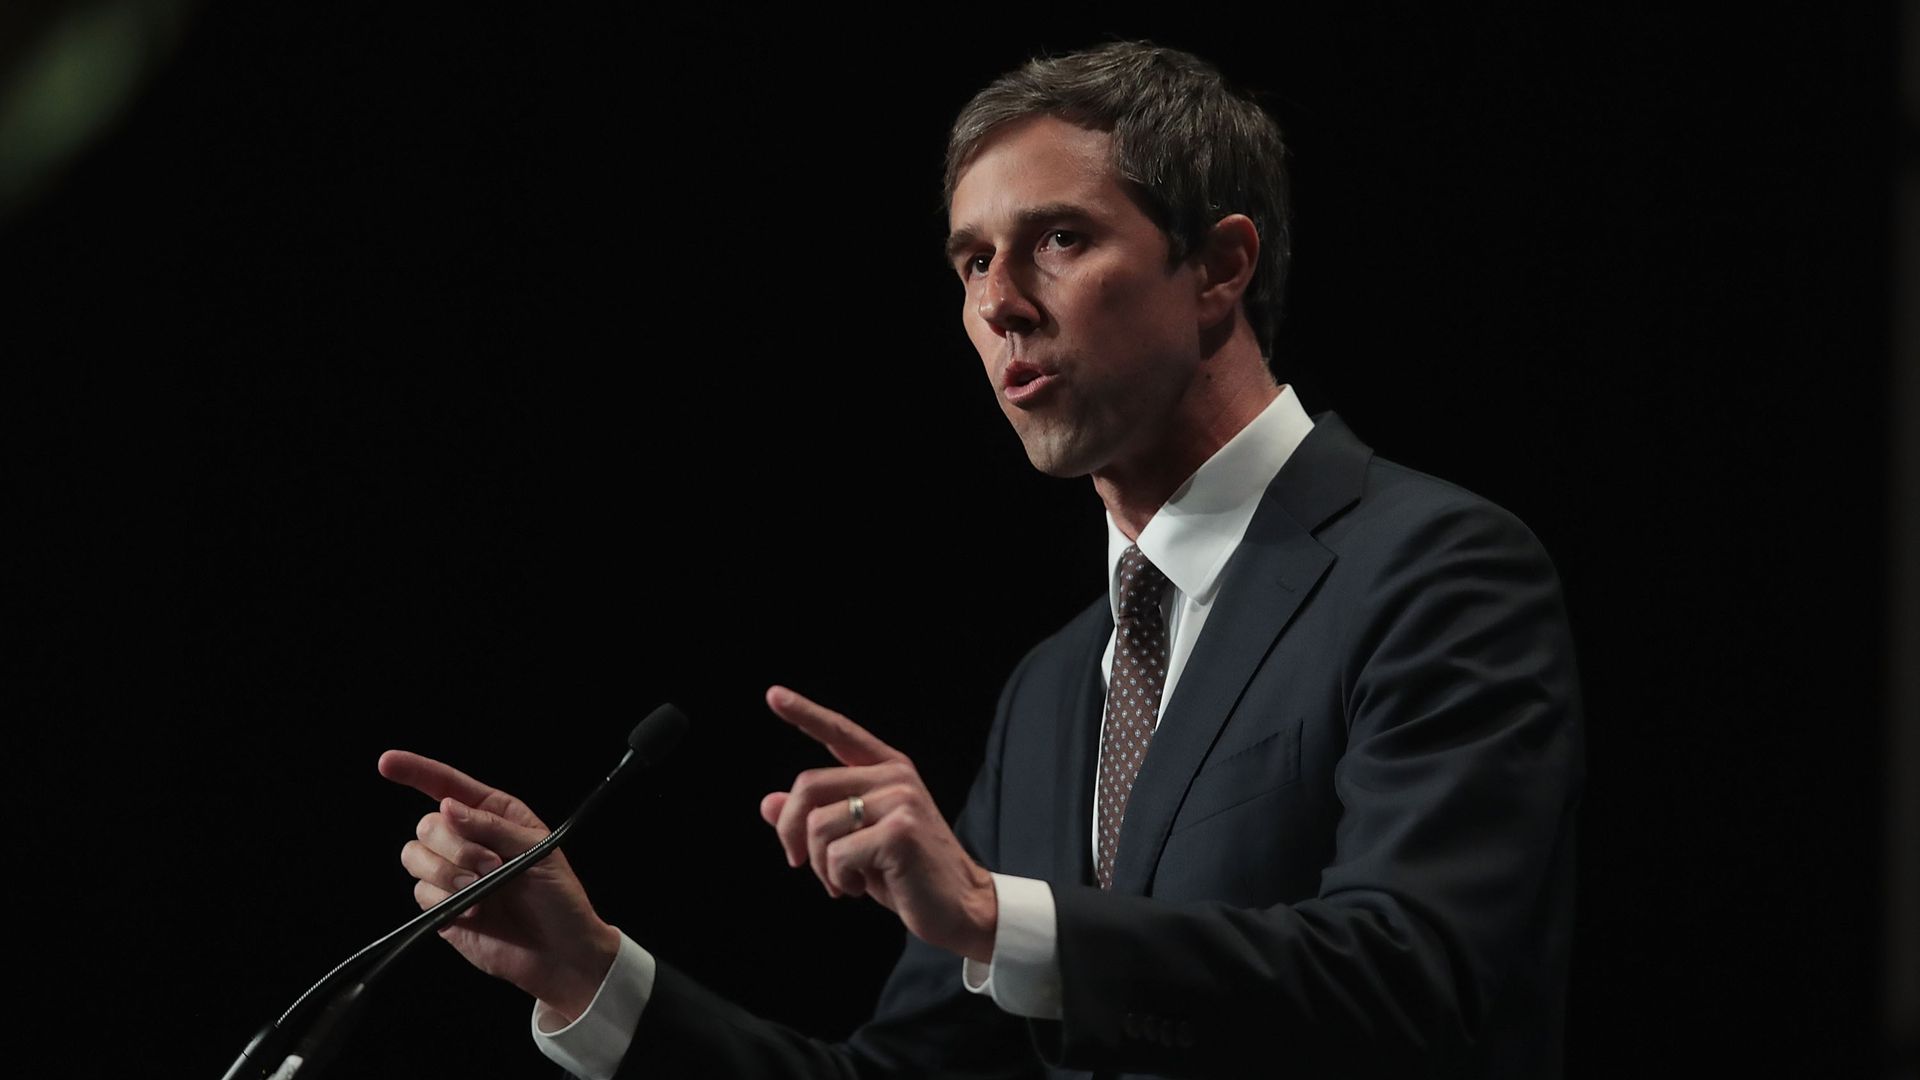 2020 Presidential Candidate Beto O'Rourke